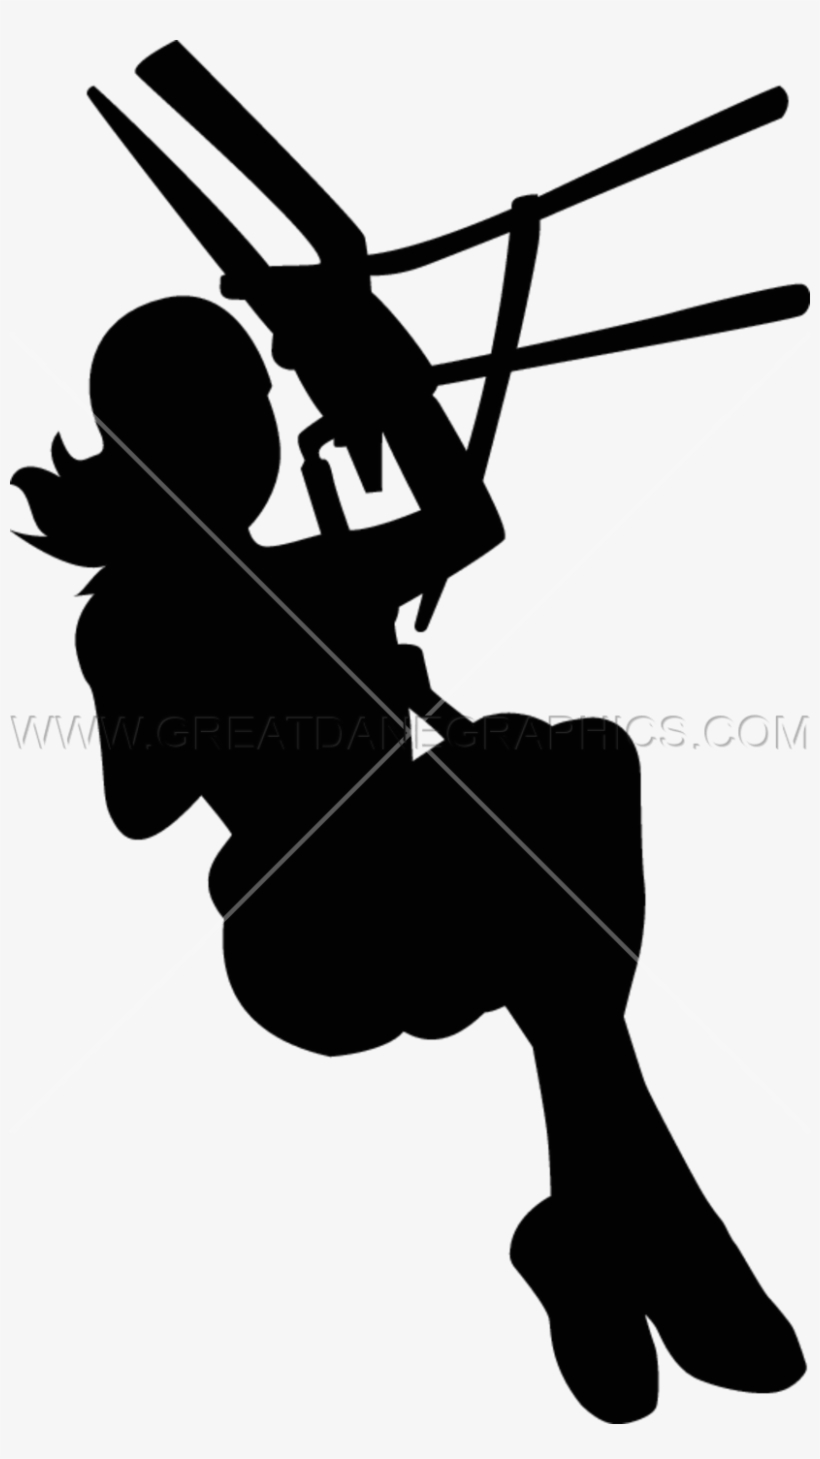 Ziplining Clipart Zip Line Svg Png Icon Free Download.